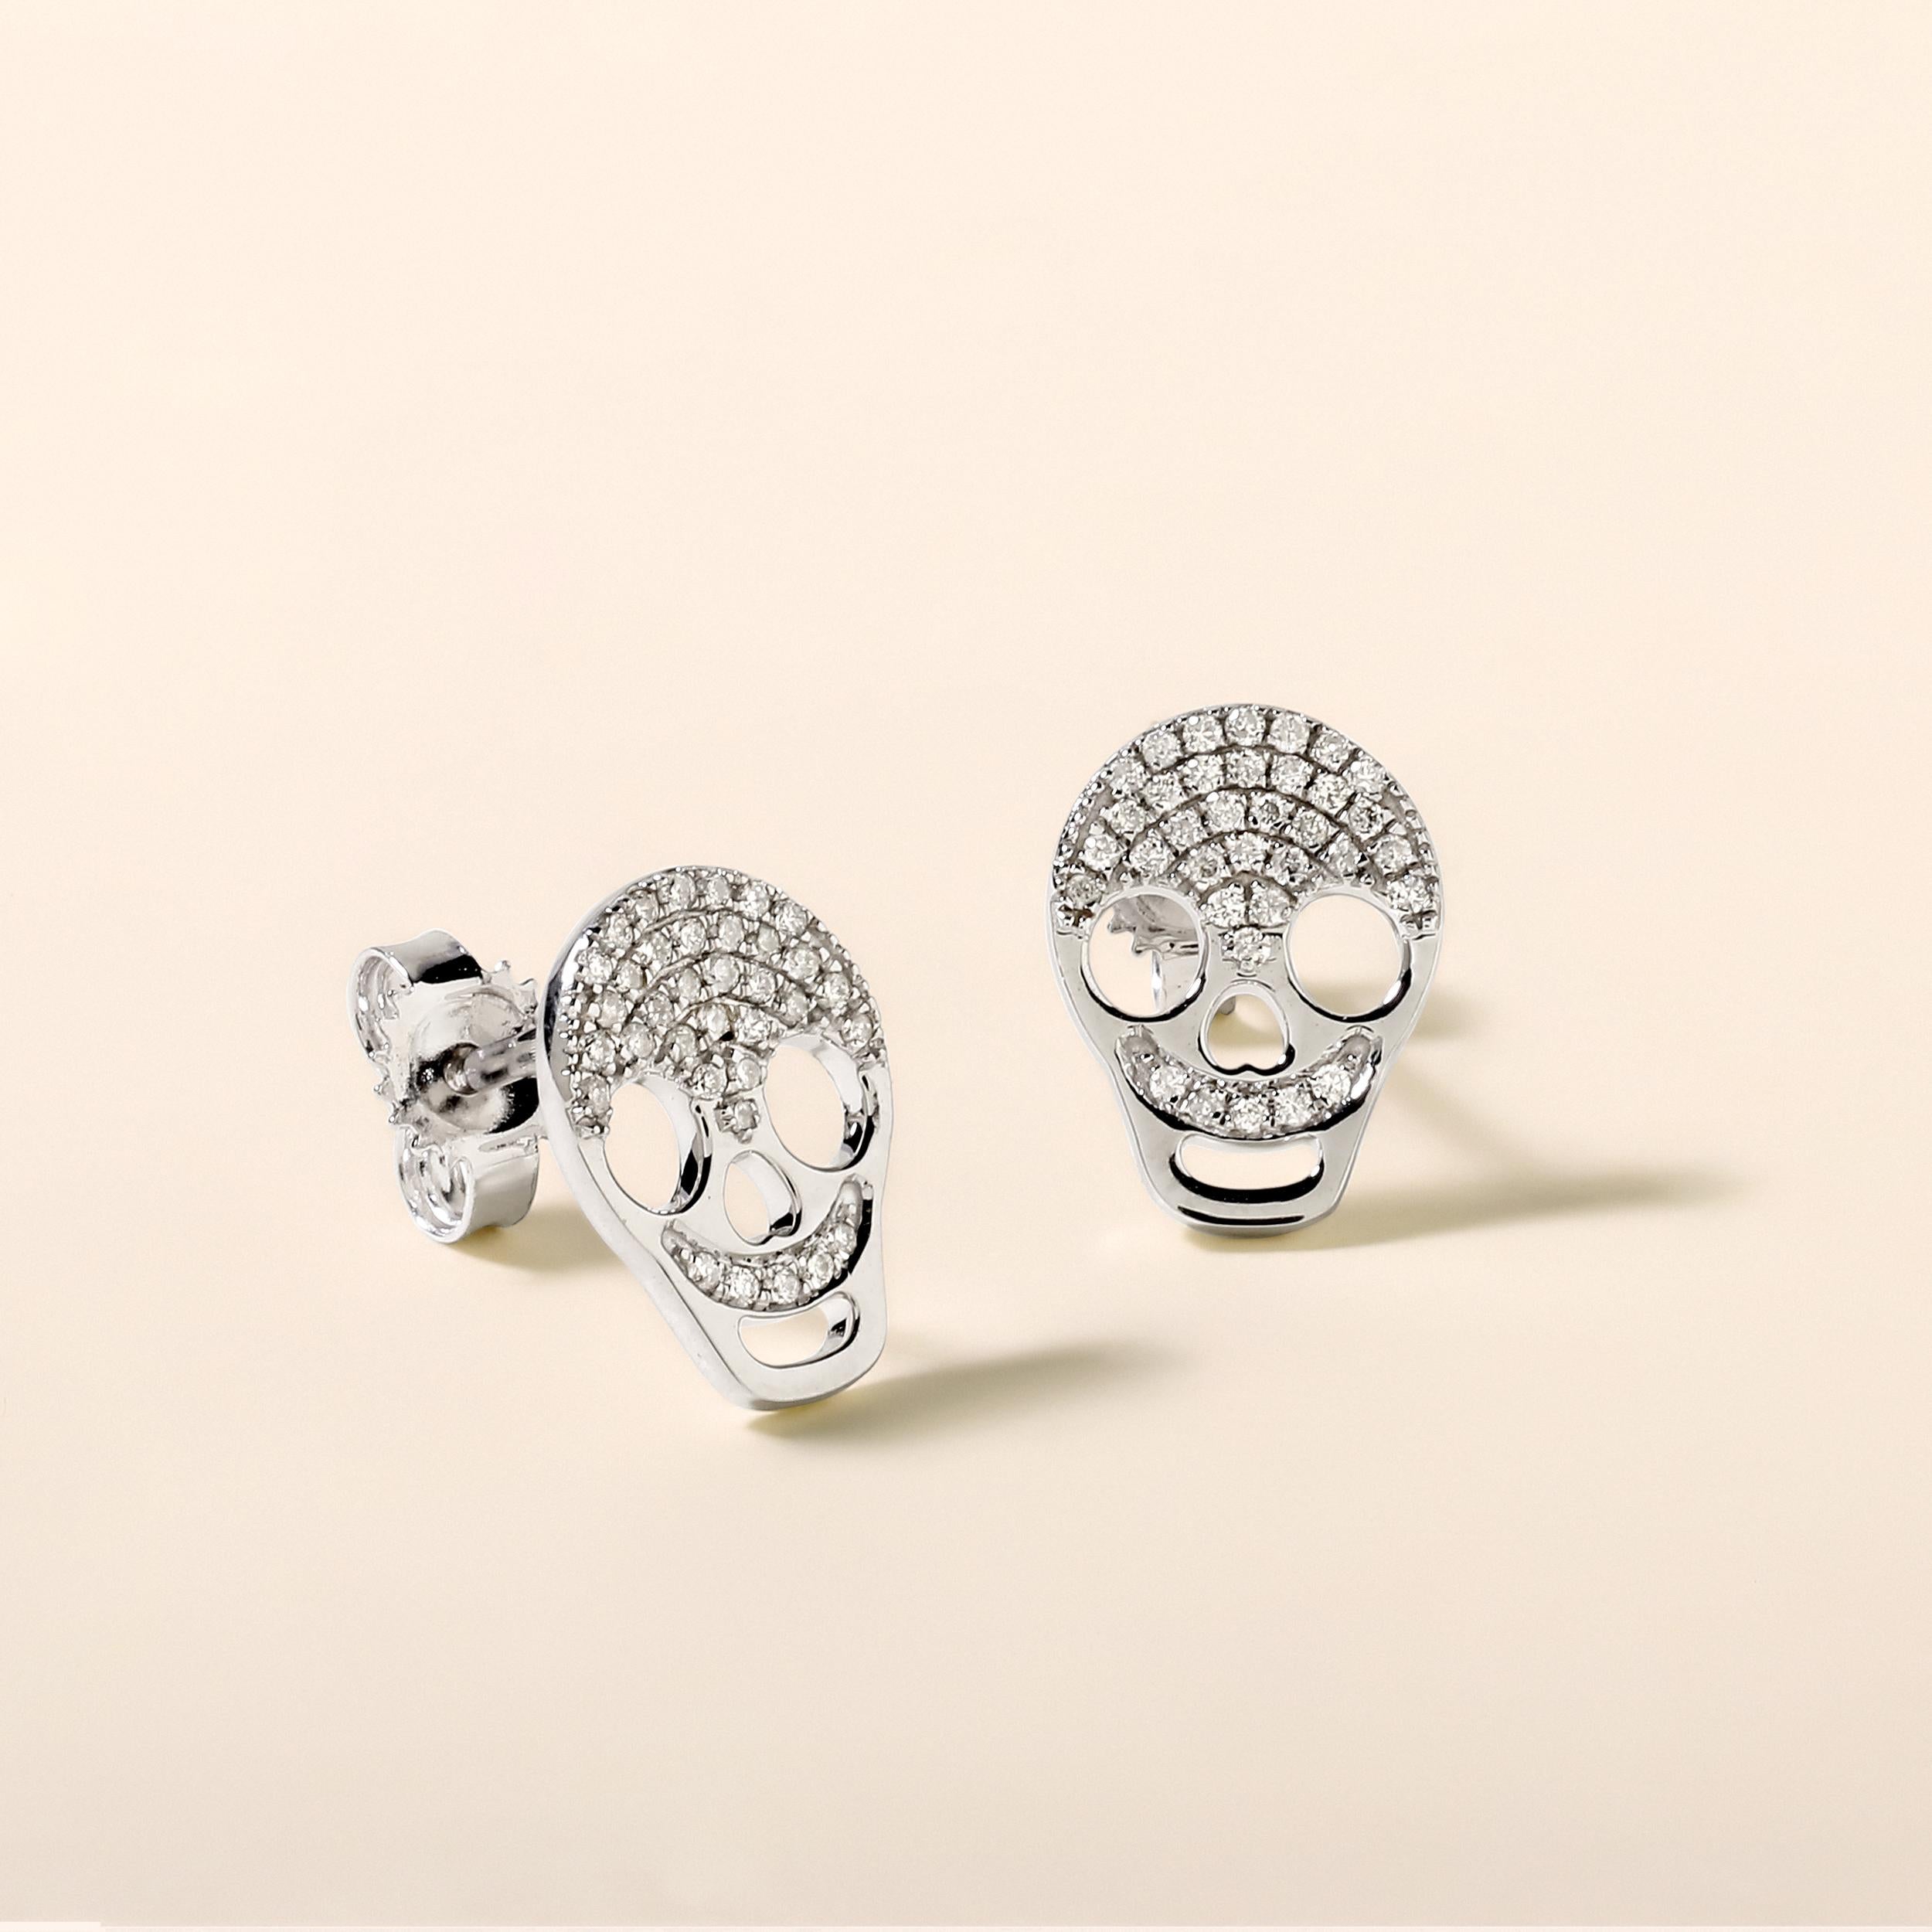 Crafted in 1.49 grams of 14K White Gold, the earrings contains 70 stones of Round Diamonds with a total of 0.14 carat in F-G color and I1-I2 clarity.

CONTEMPORARY AND TIMELESS ESSENCE: Crafted in 14-karat/18-karat with 100% natural diamond and